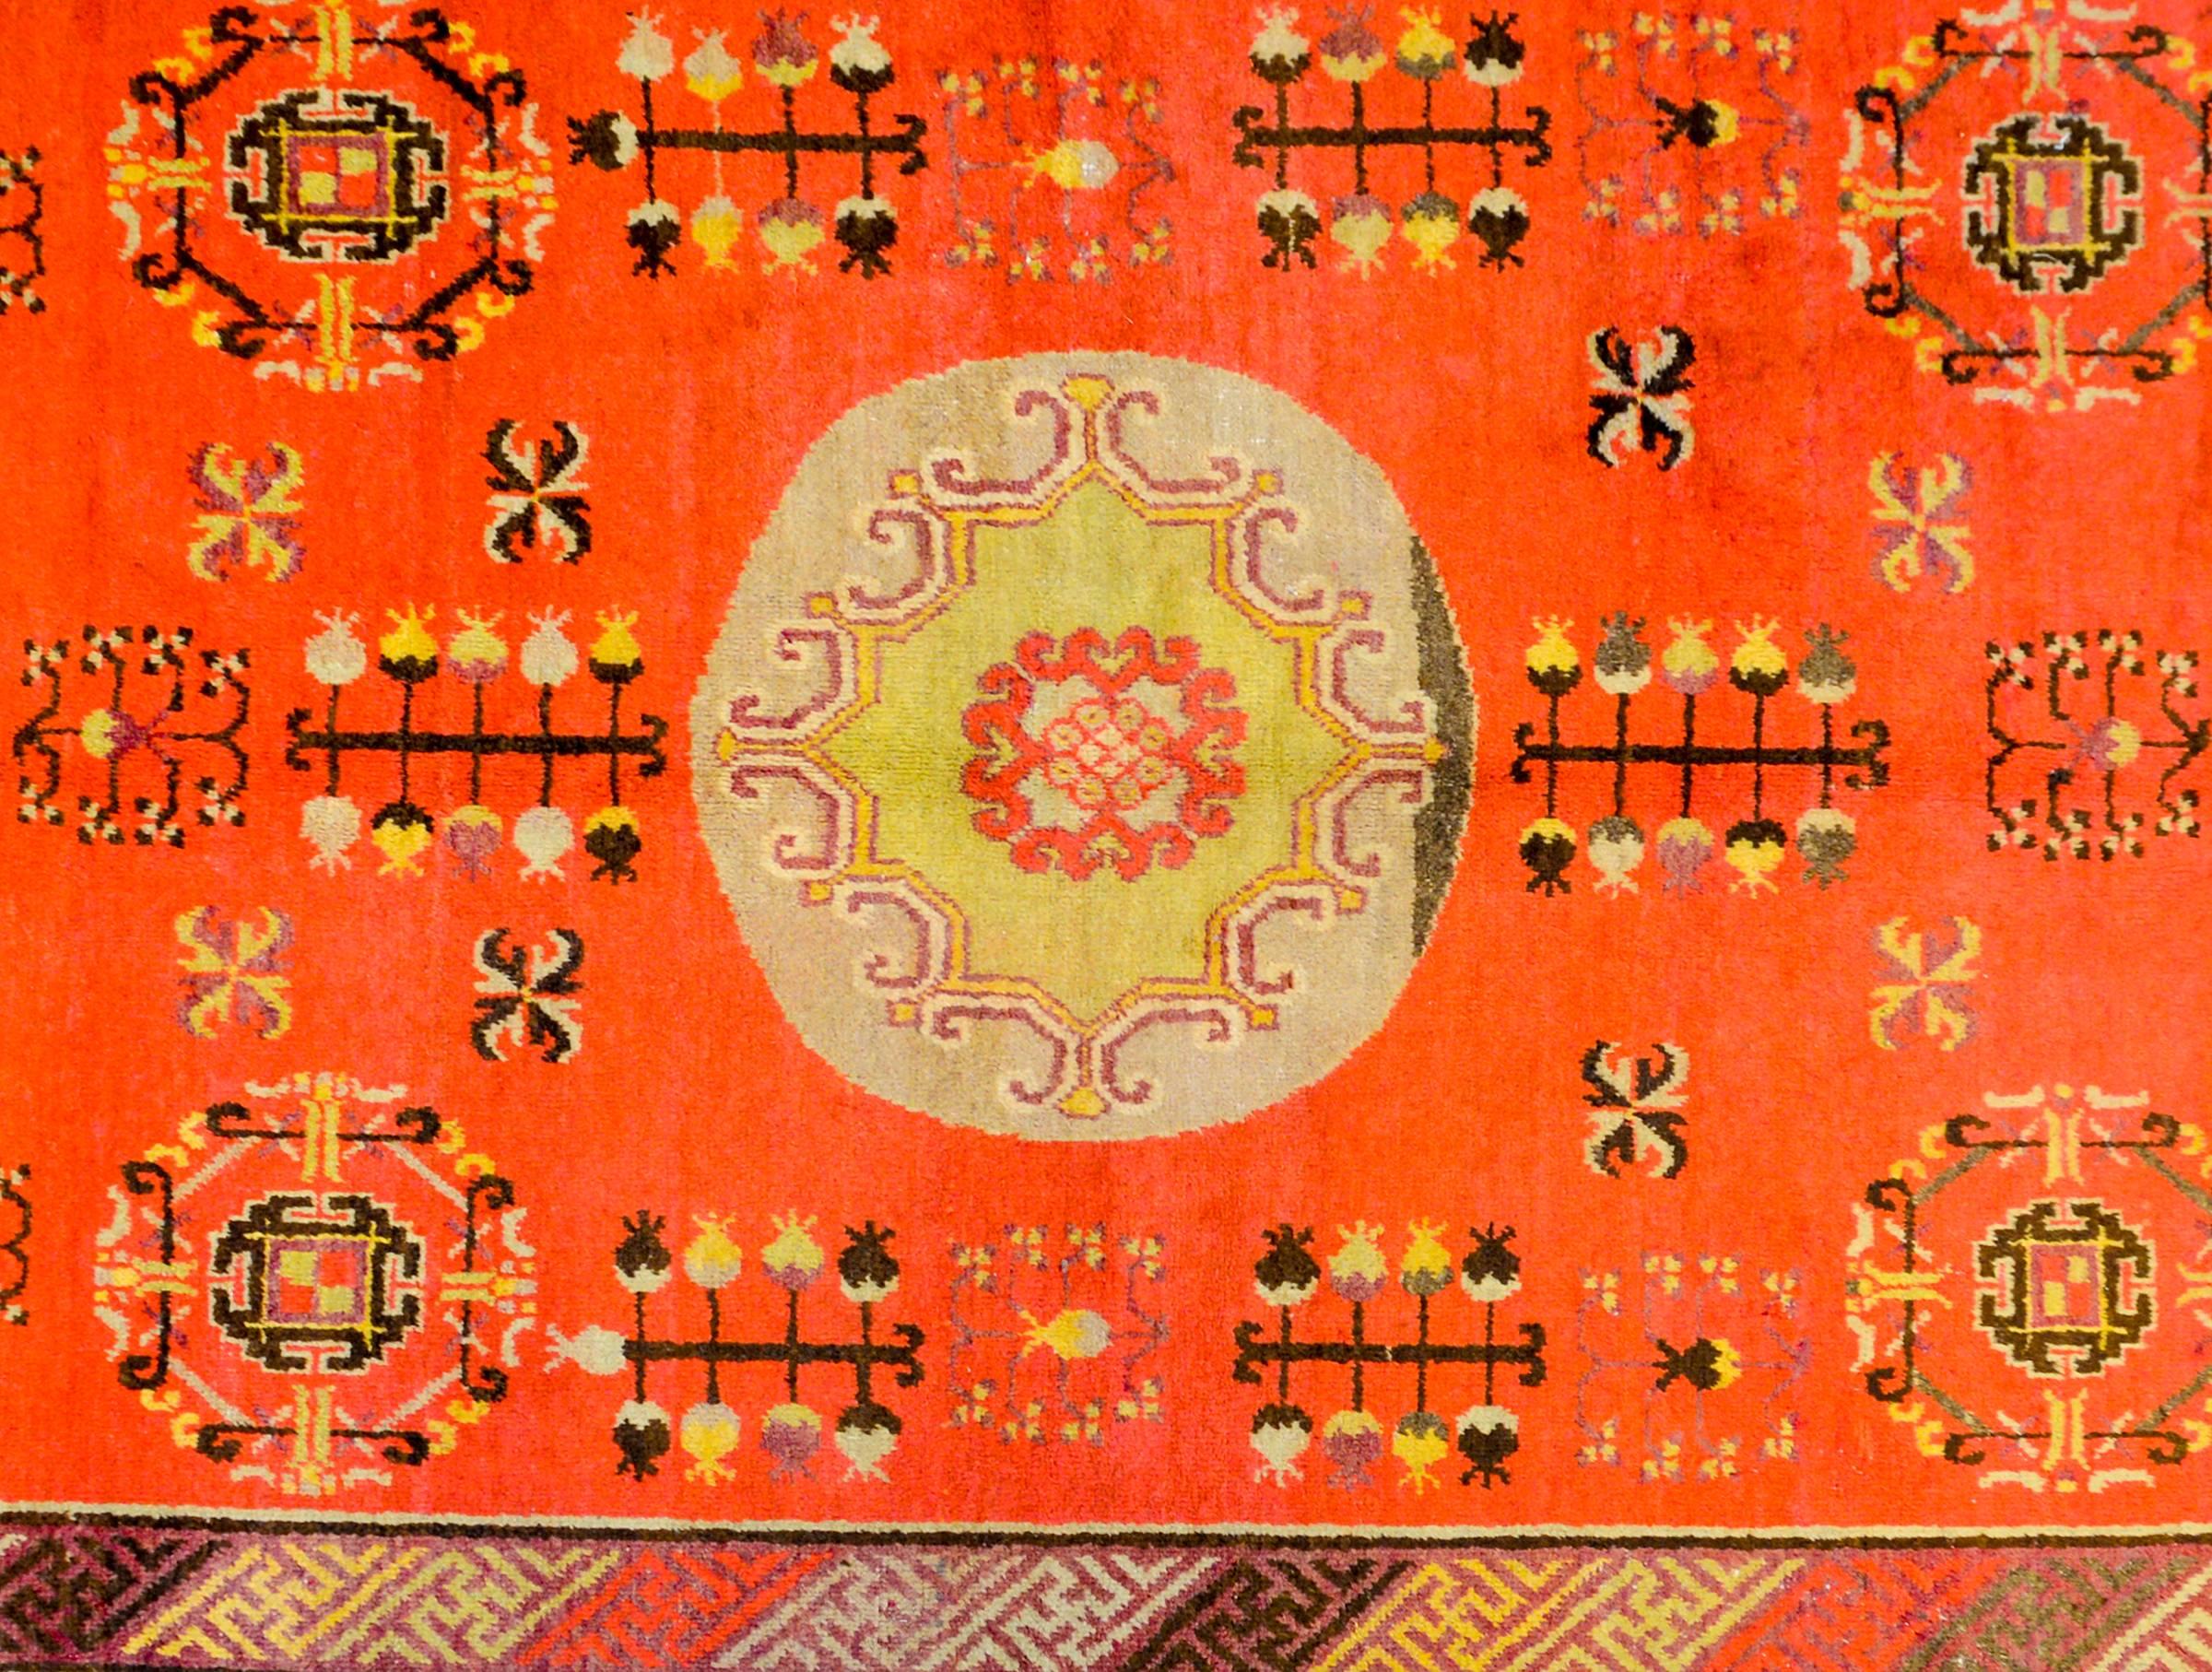 An amazing early 20th century Central Asian Khotan rug with a wonderful burnt red or orange abrash background with a large central pale indigo medallion surrounded by a field of tree-of-life and pomegranate motifs. The border is exquisite, with an